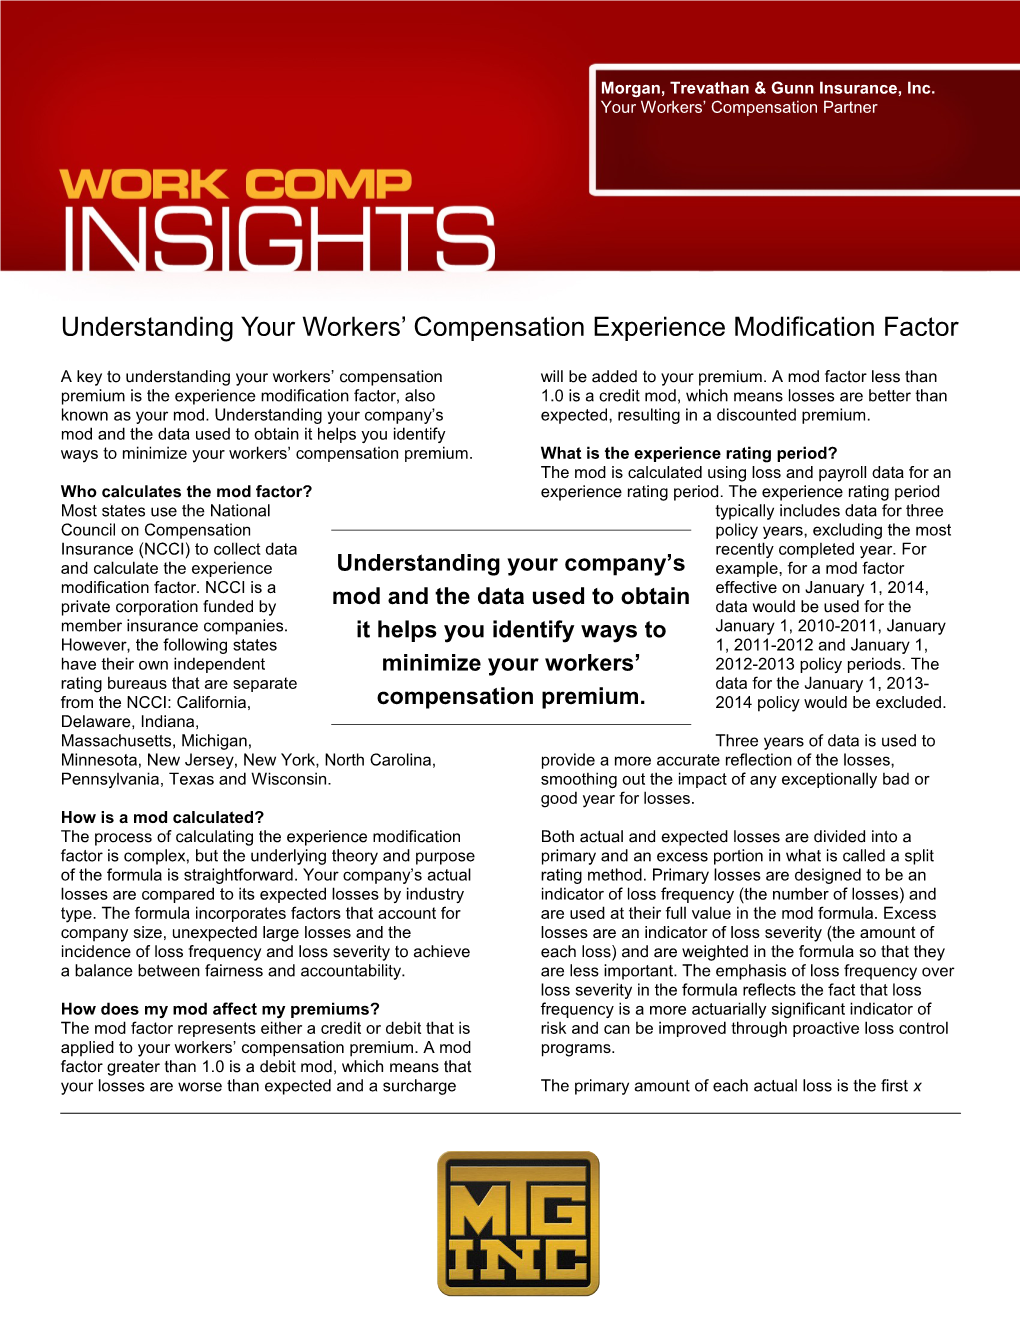 Understanding Your Workers Compensation Experience Modification Factor